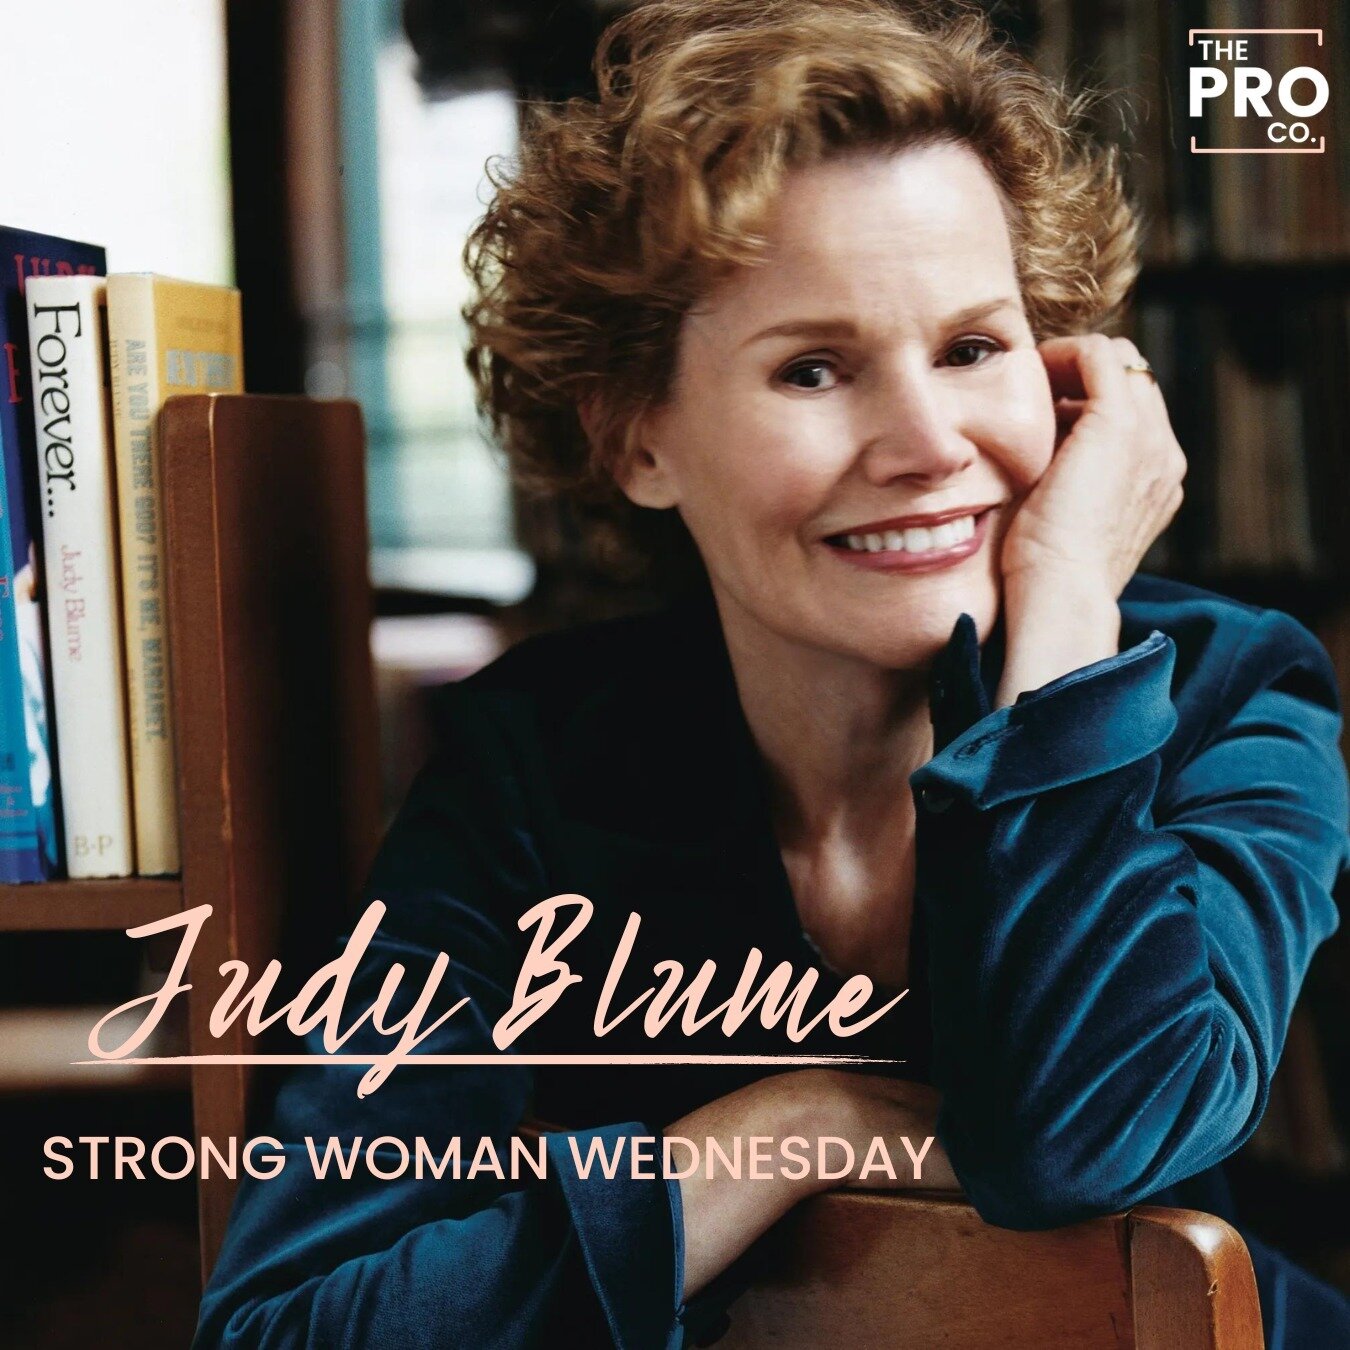 Happy #StrongWomanWednesday 😄 

Today, we're giving a shoutout to Judy Blume, a legendary and boundary-breaking author. She has published over 25 novels since beginning her career in 1959. She is best known for &quot;Are You There God? It's Me, Marg